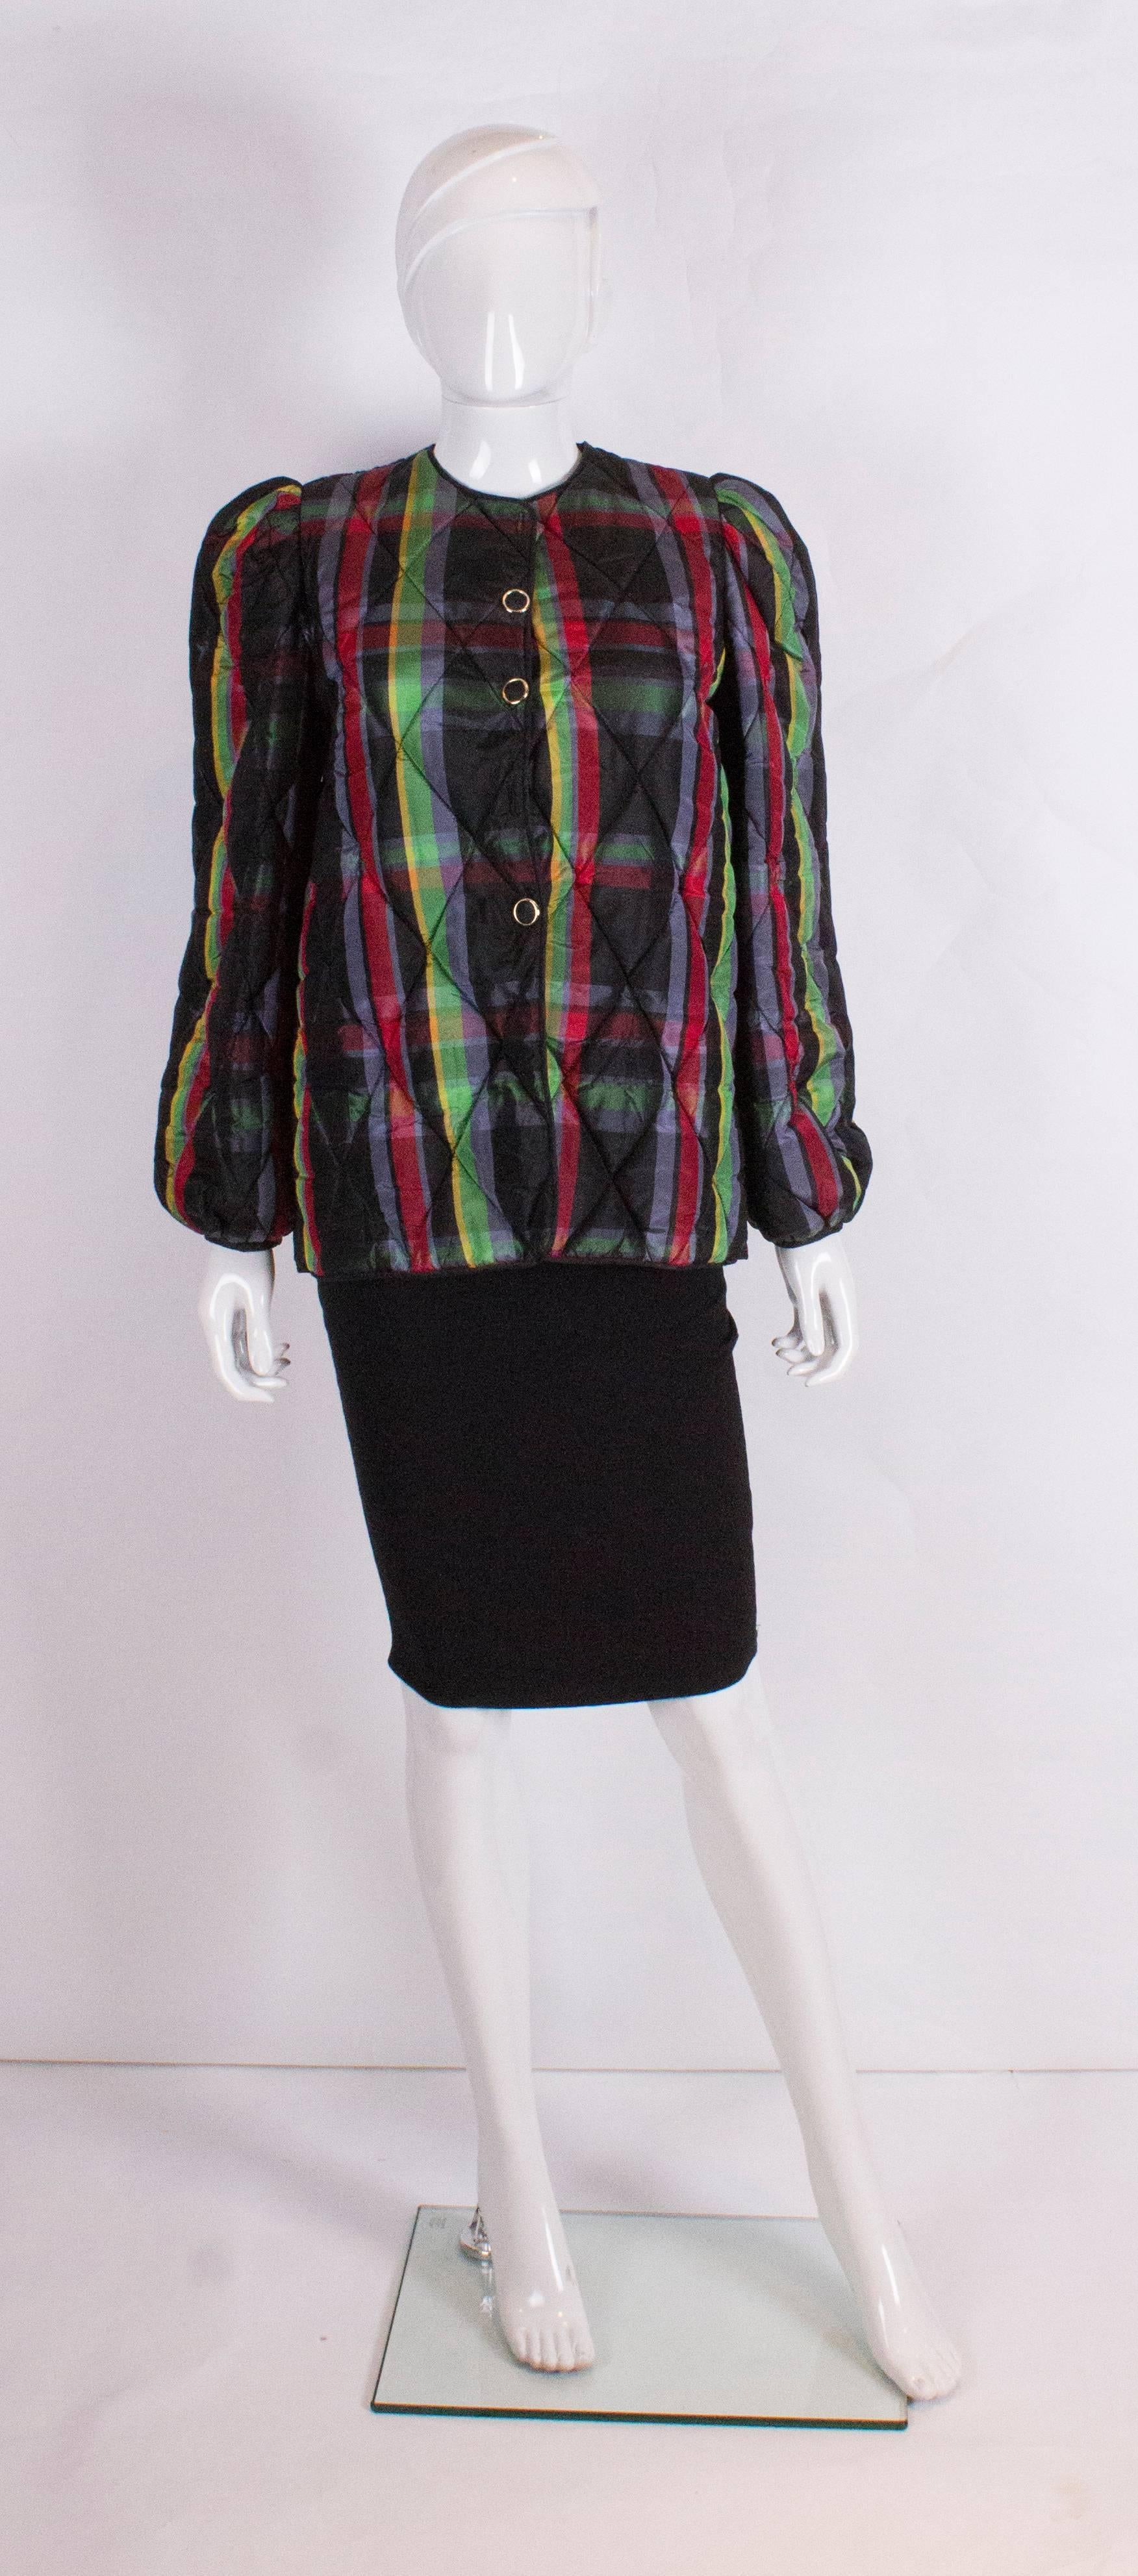 A chic vintage winter warmer, a silk  multi colour quilted jacket. The jacket is collarless, and gathered at the shoulders and cuffs. It is lined in black.